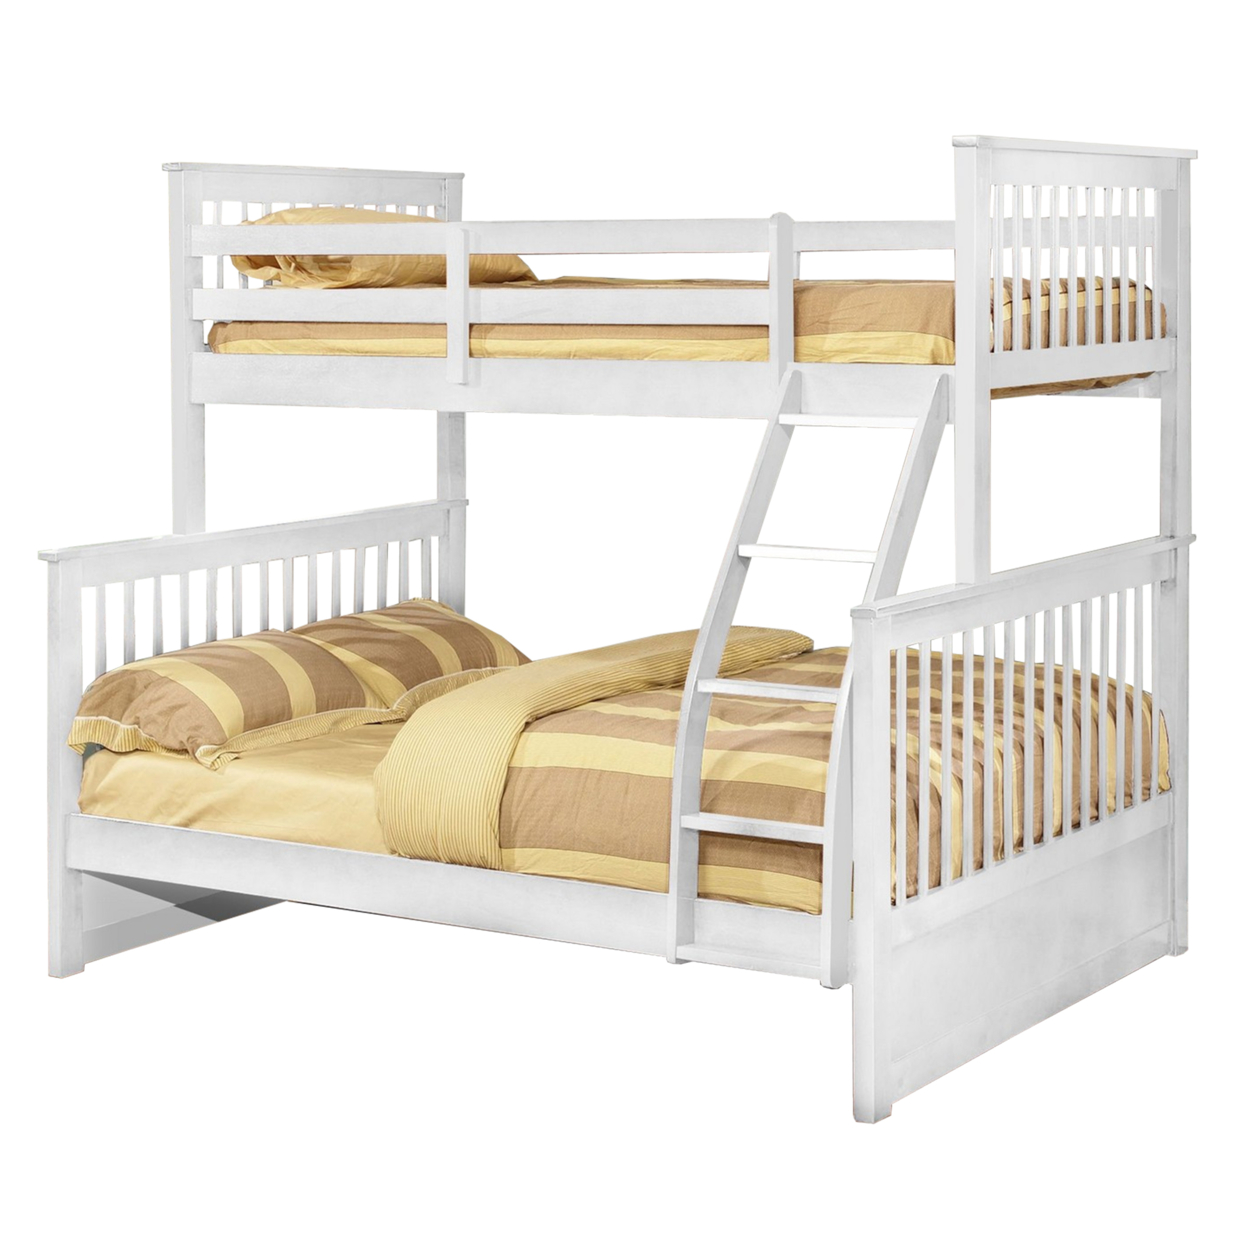 Mission Style Wooden Twin Over Full Bunk Bed With Slatted Headboard, White- Saltoro Sherpi